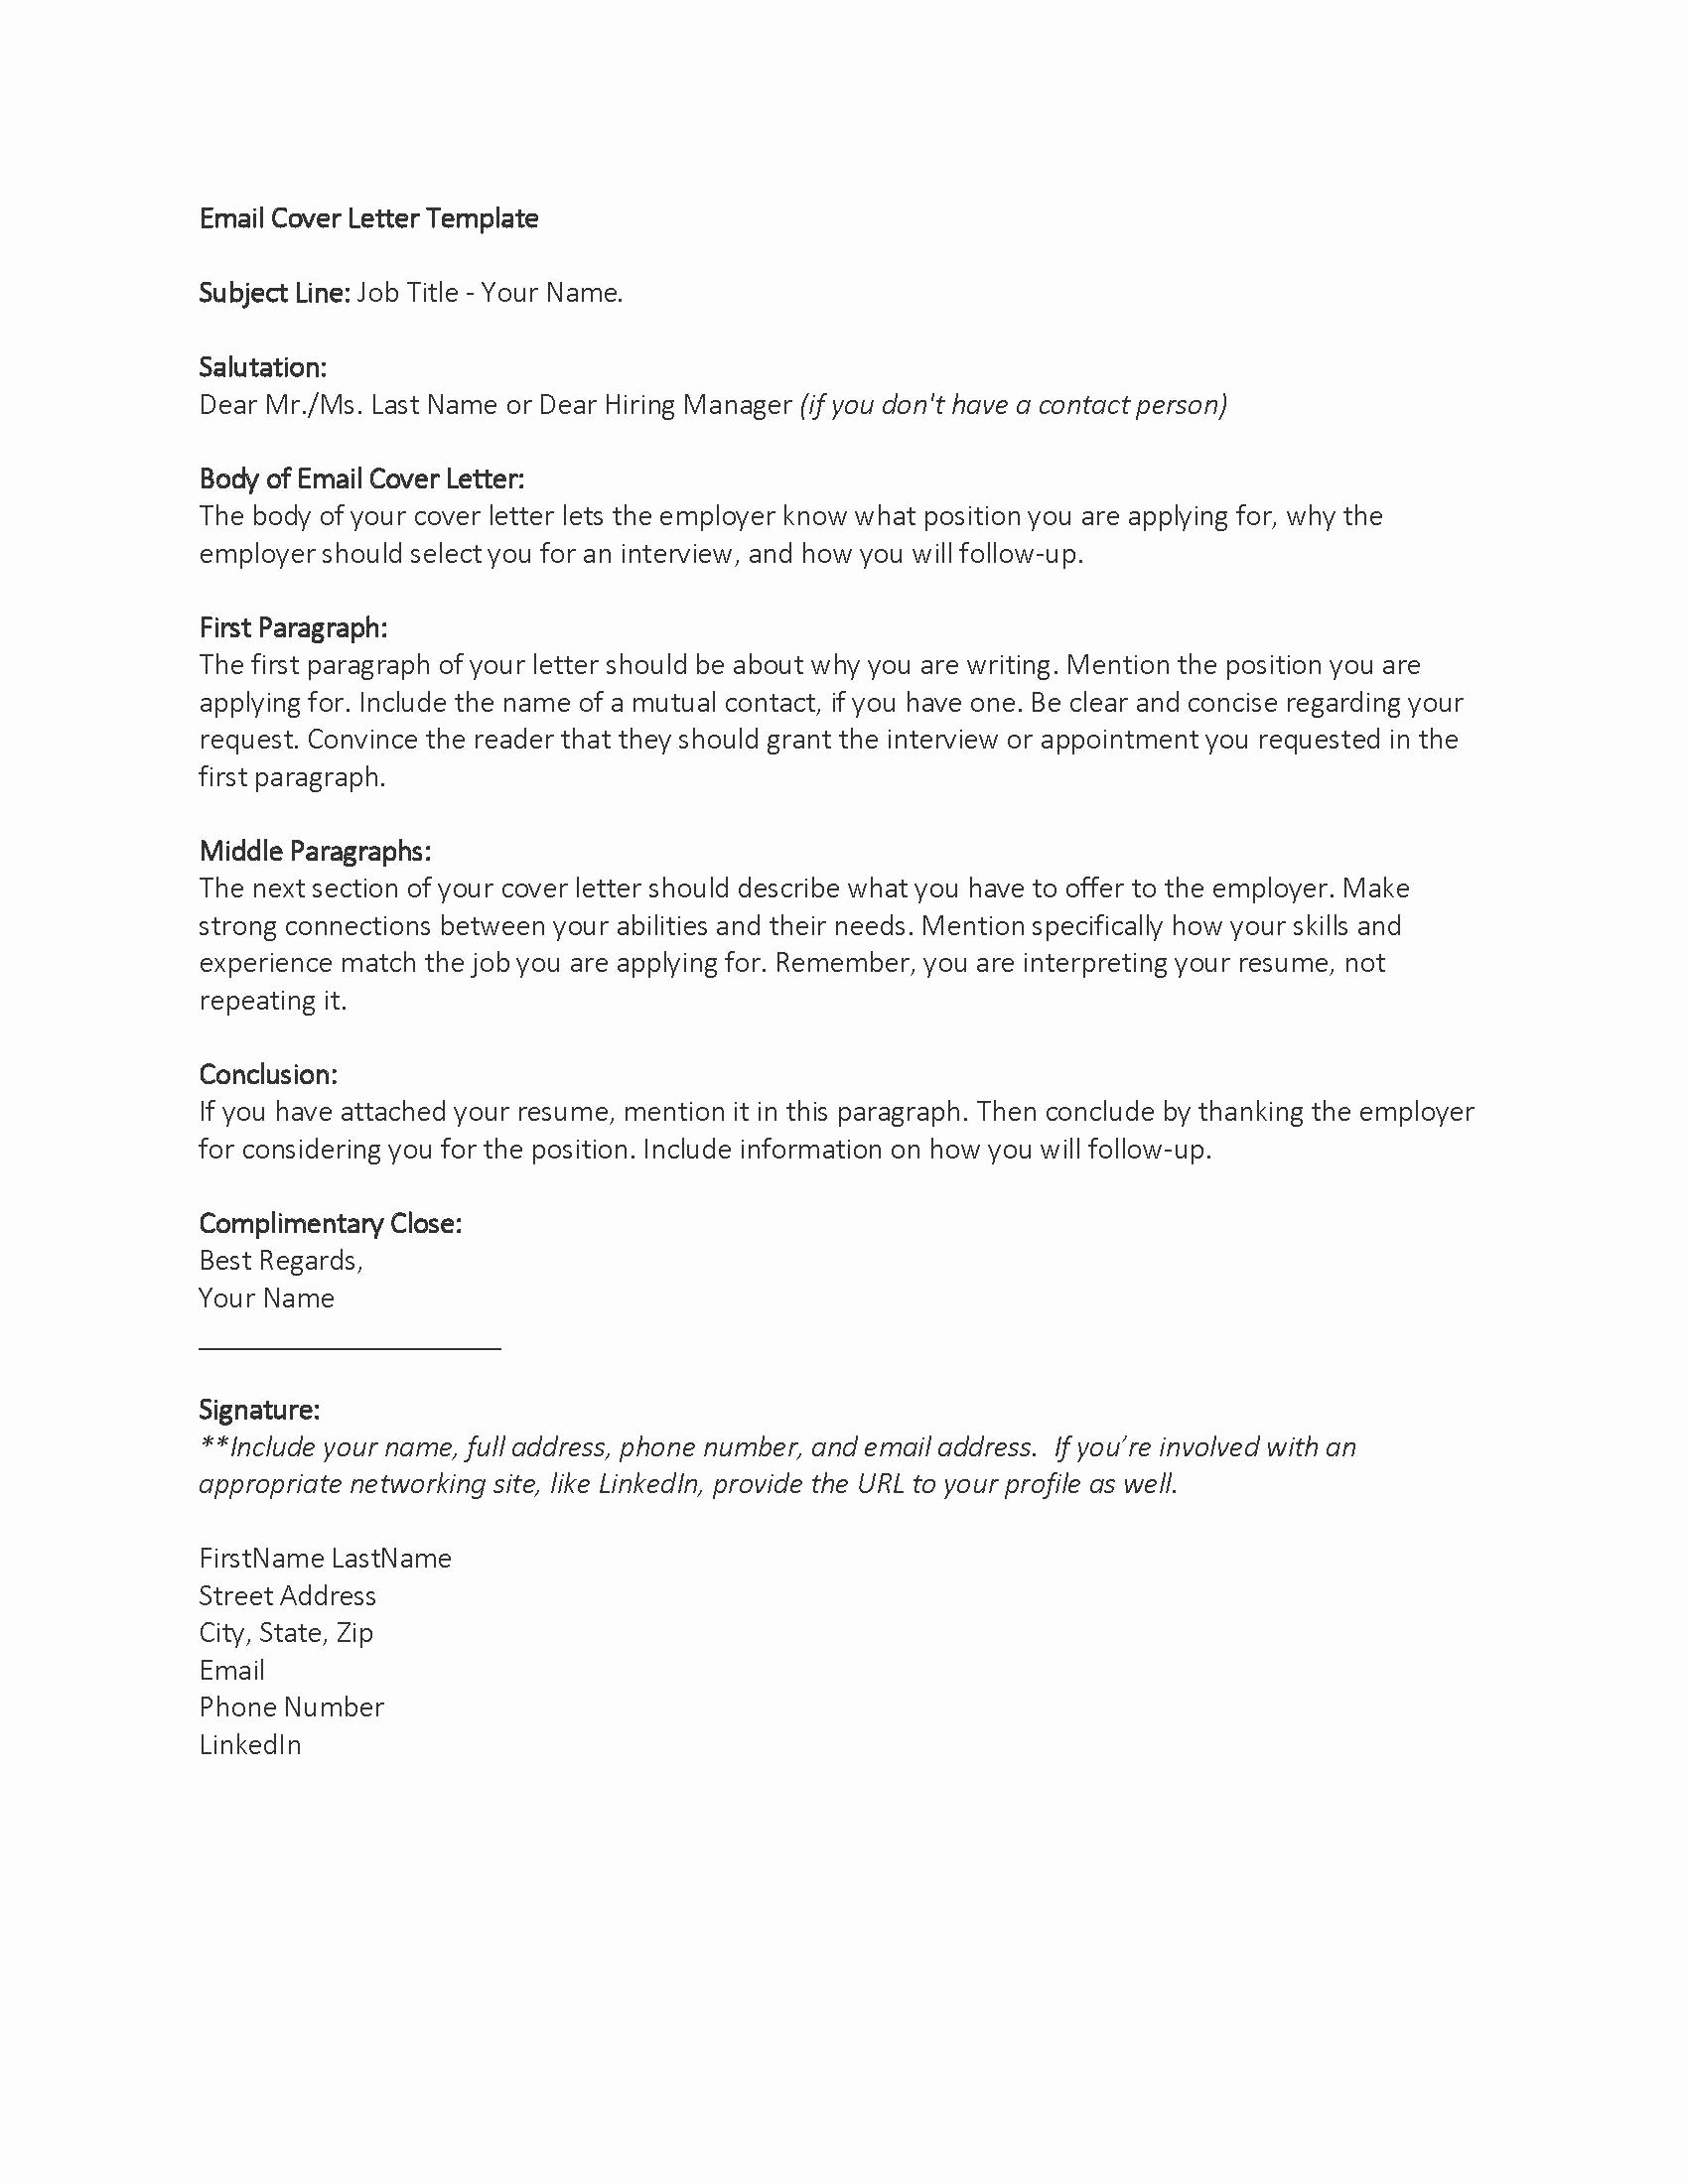 Application Letter Sample Cover Letter Template Email